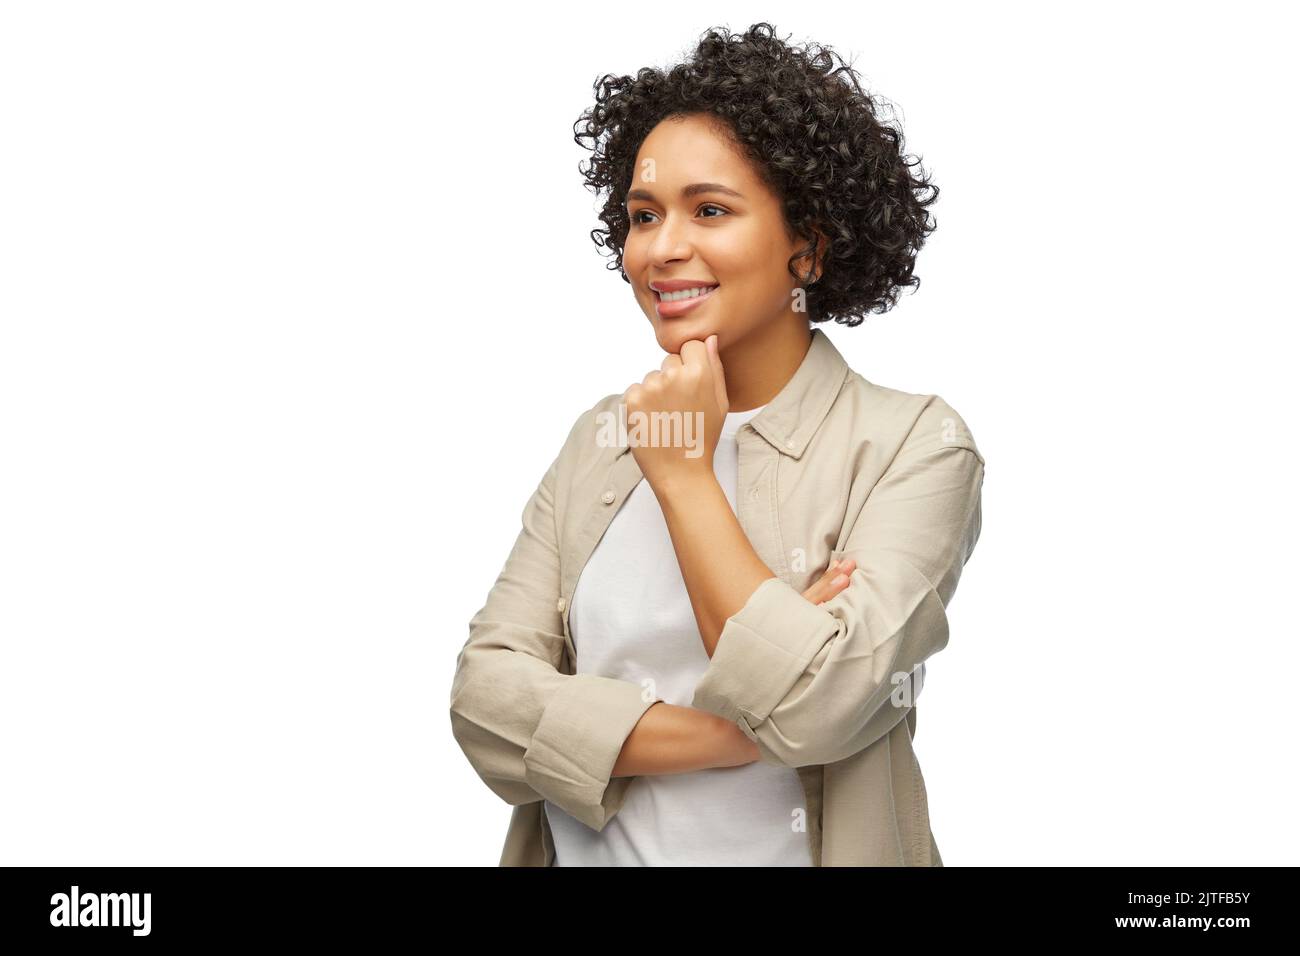 portrait of smiling thinking woman in shirt Stock Photo